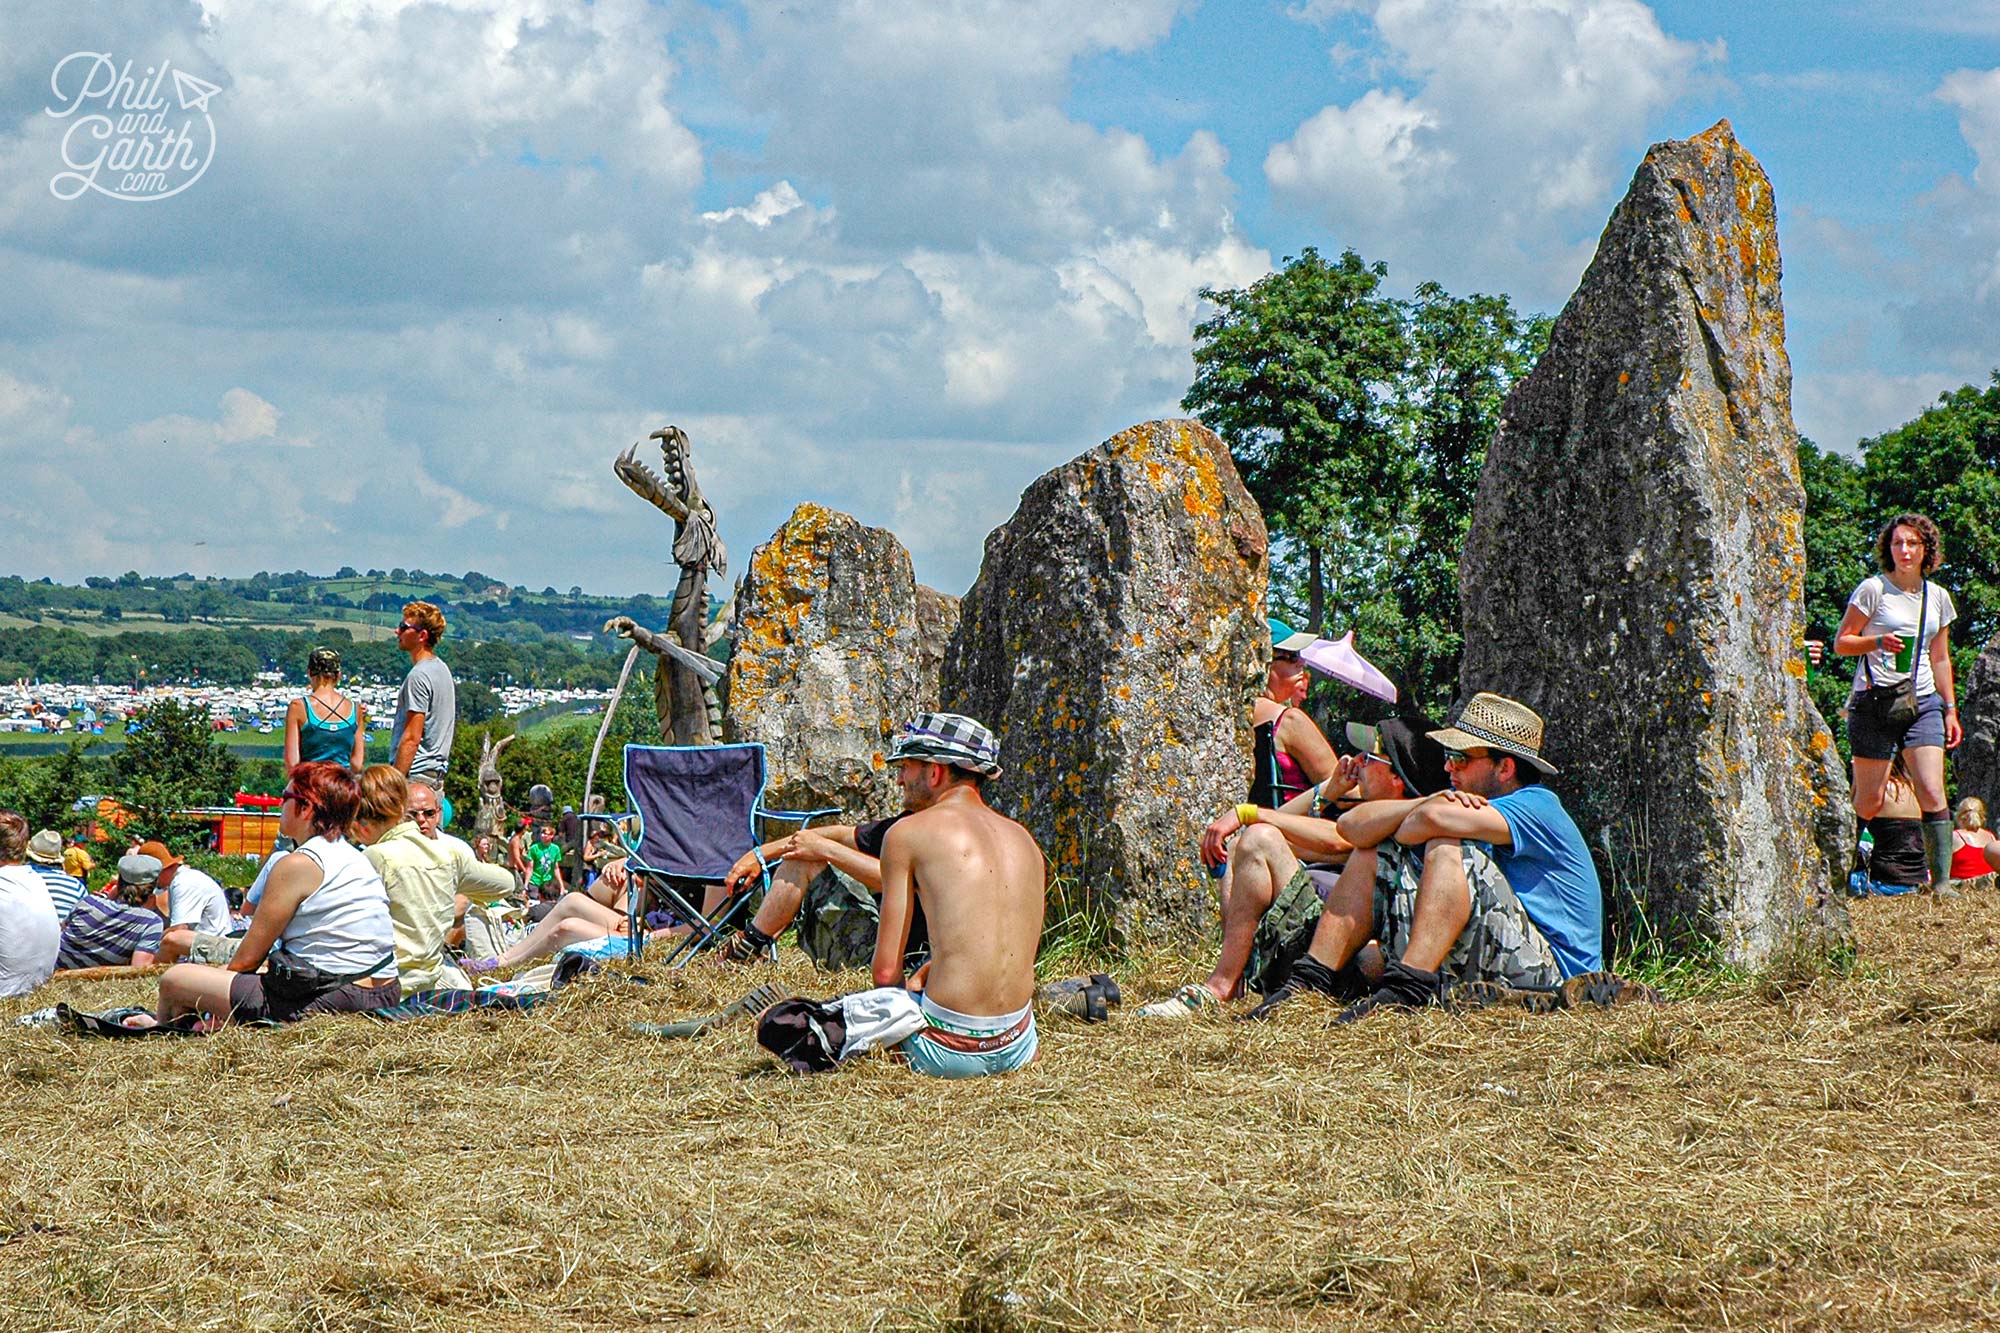 Seek solace with a quiet moment by the Stone Circle